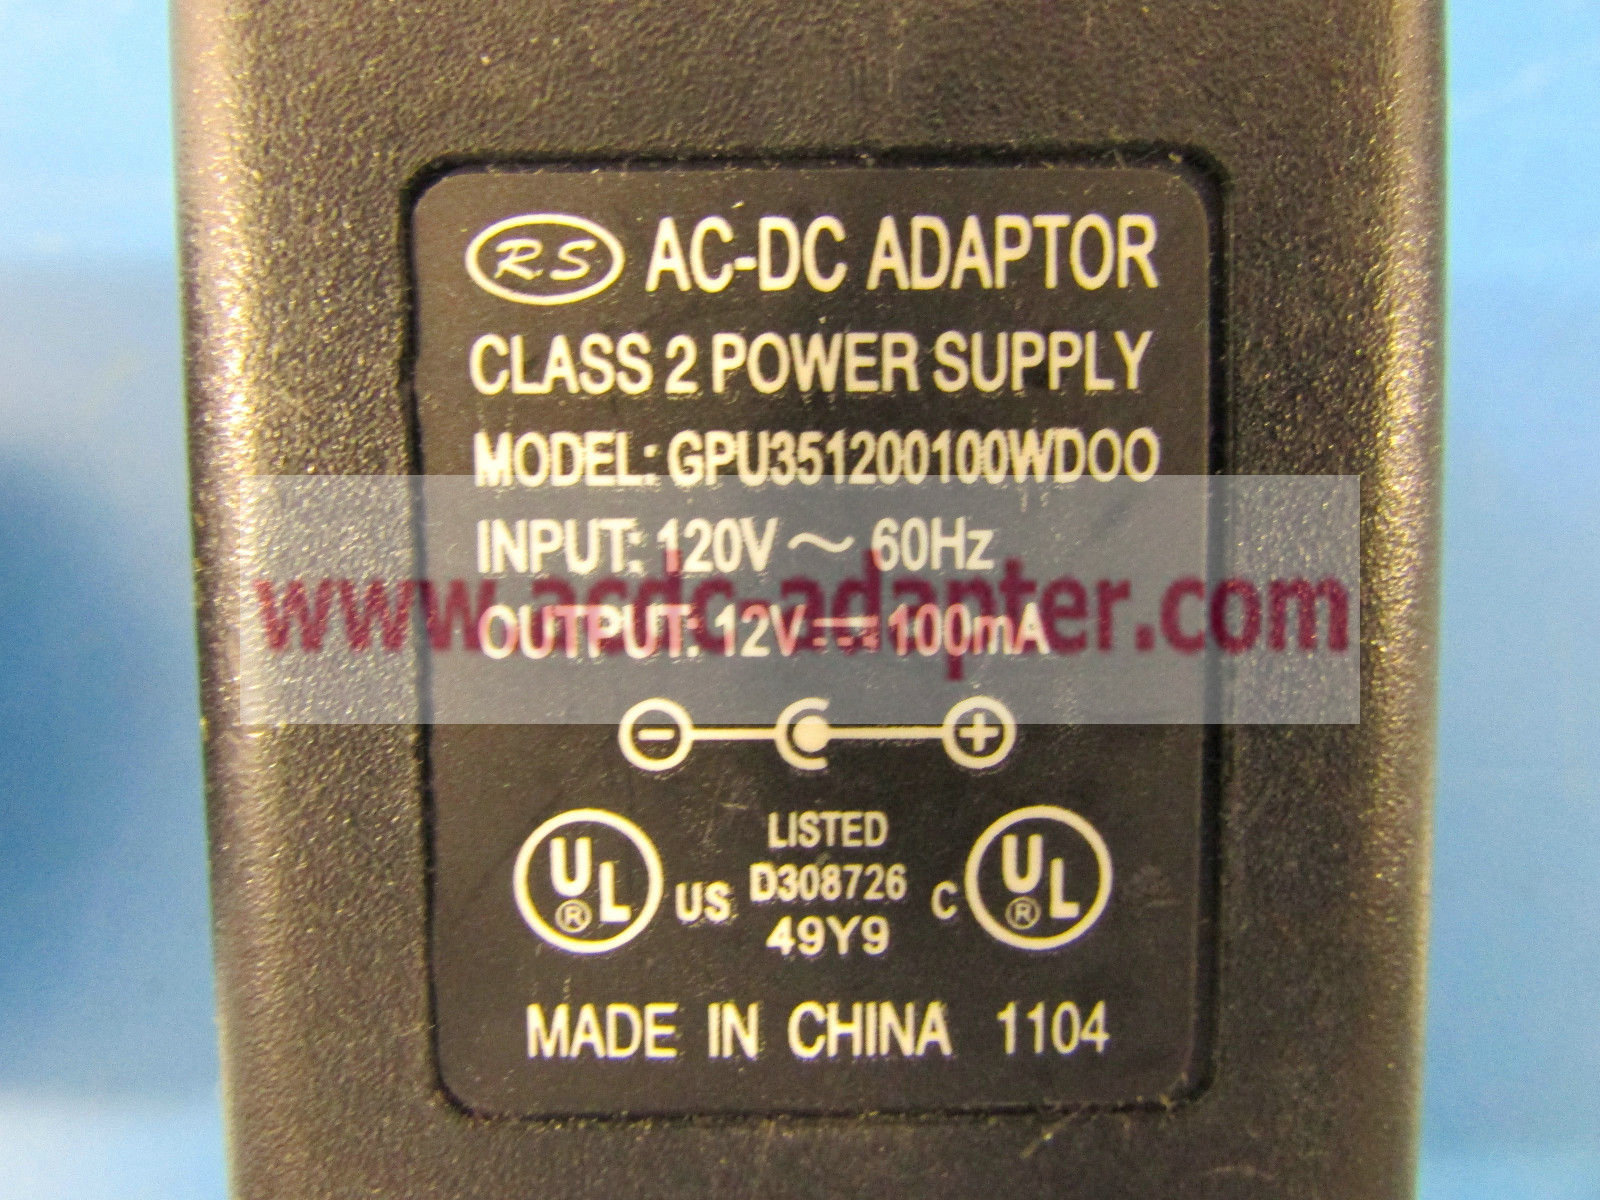 NEW RS 12V 100mA AC-DC Adapter GPU351200100WDOO Class 2 Power Supply - Click Image to Close